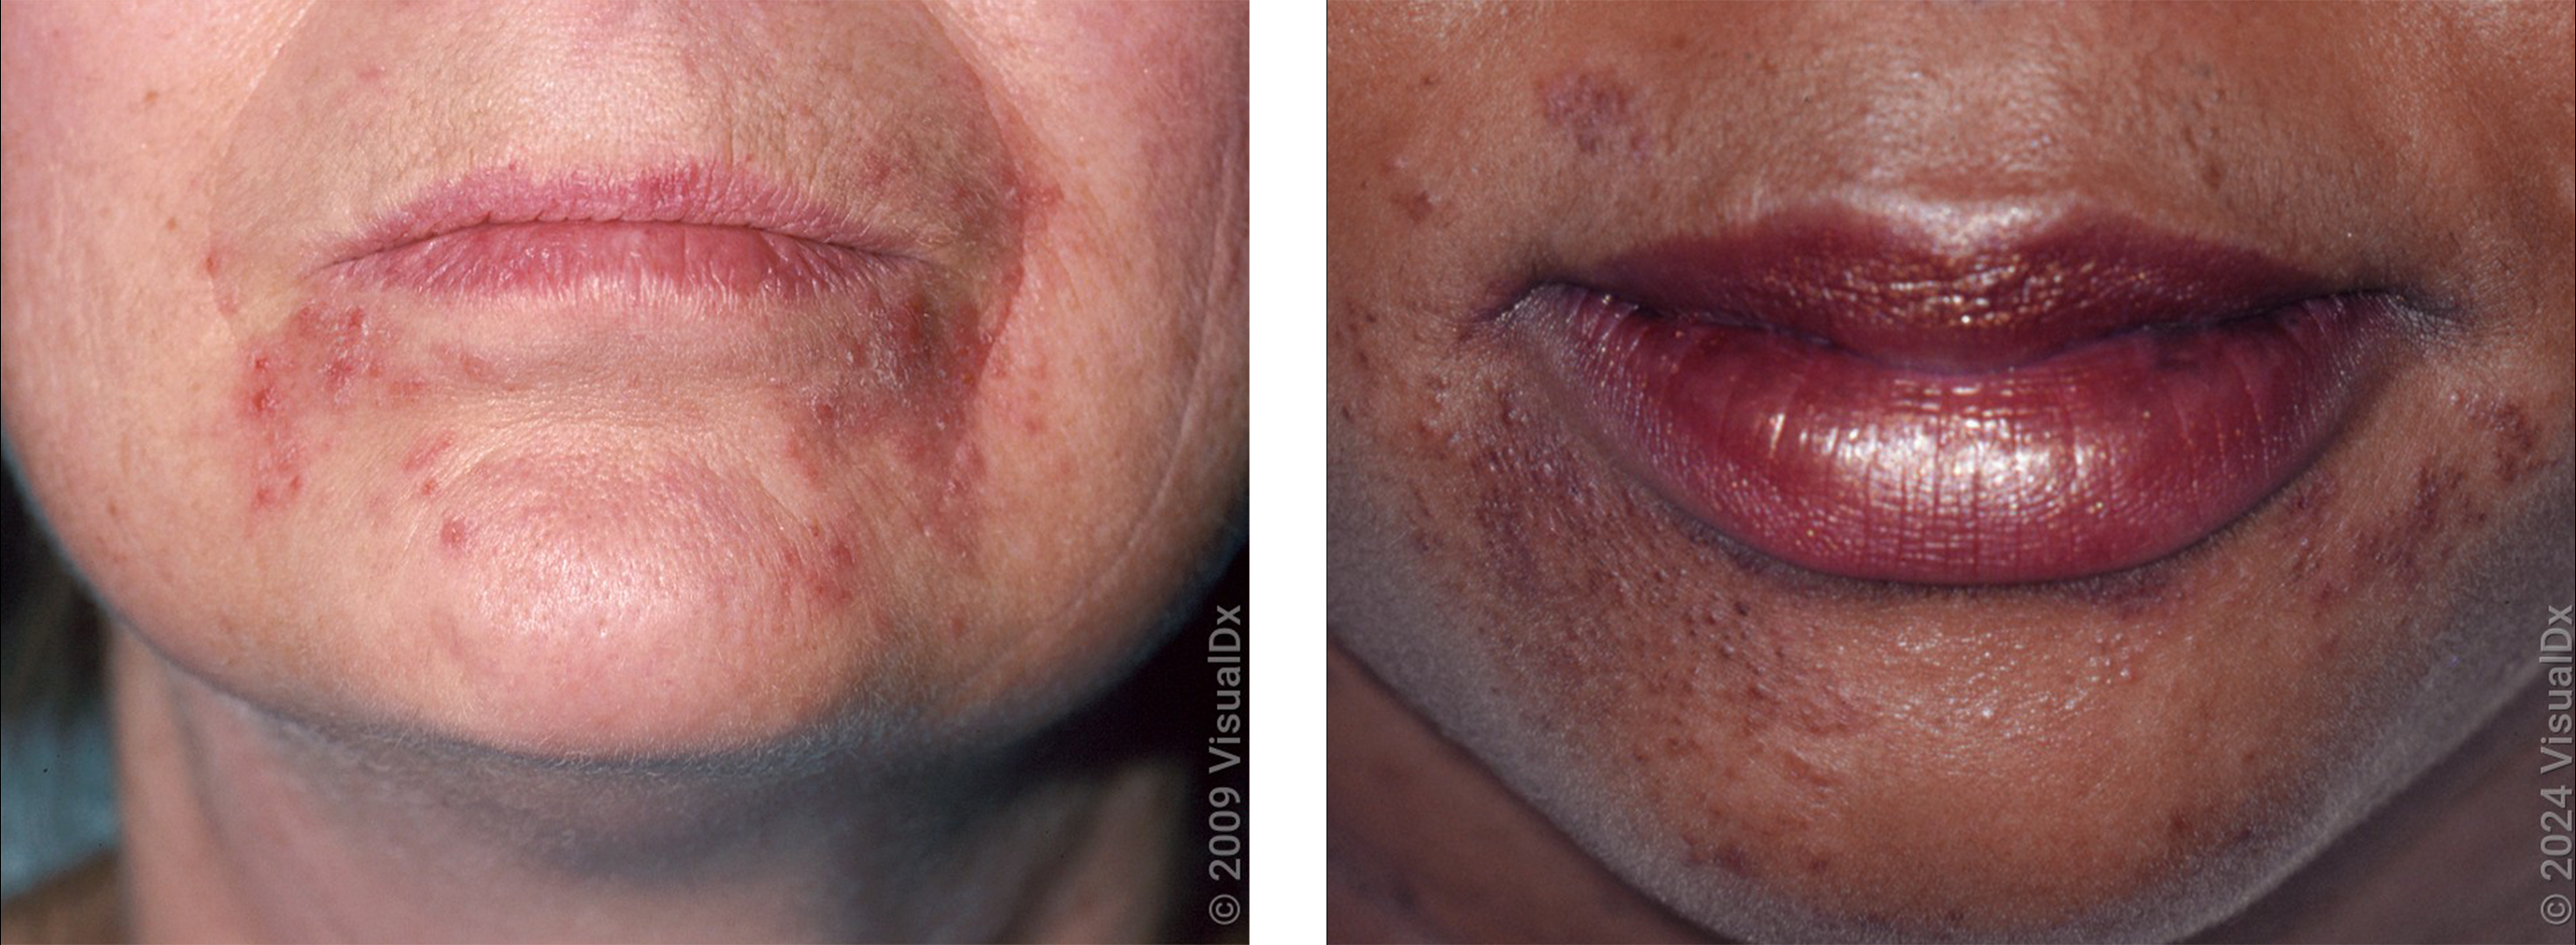 Left: Small, pink bumps and scaly patches around the mouth in perioral dermatitis. Right: Small, brown and purple bumps around the mouth in perioral dermatitis.